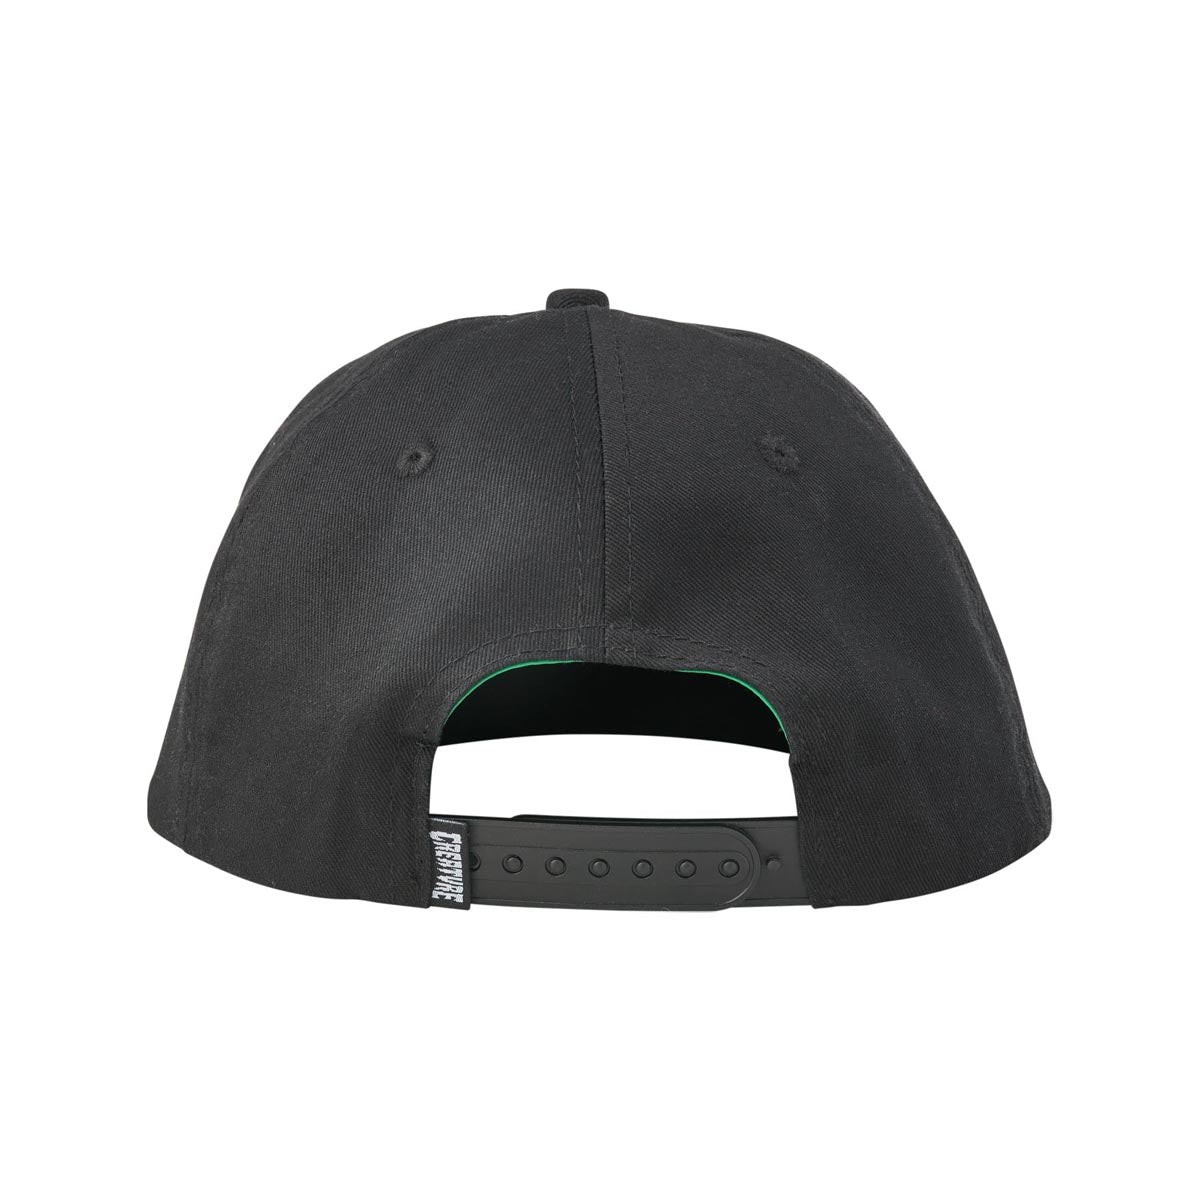 Creature Rolling In The Grave Snapback Hat - Black image 4